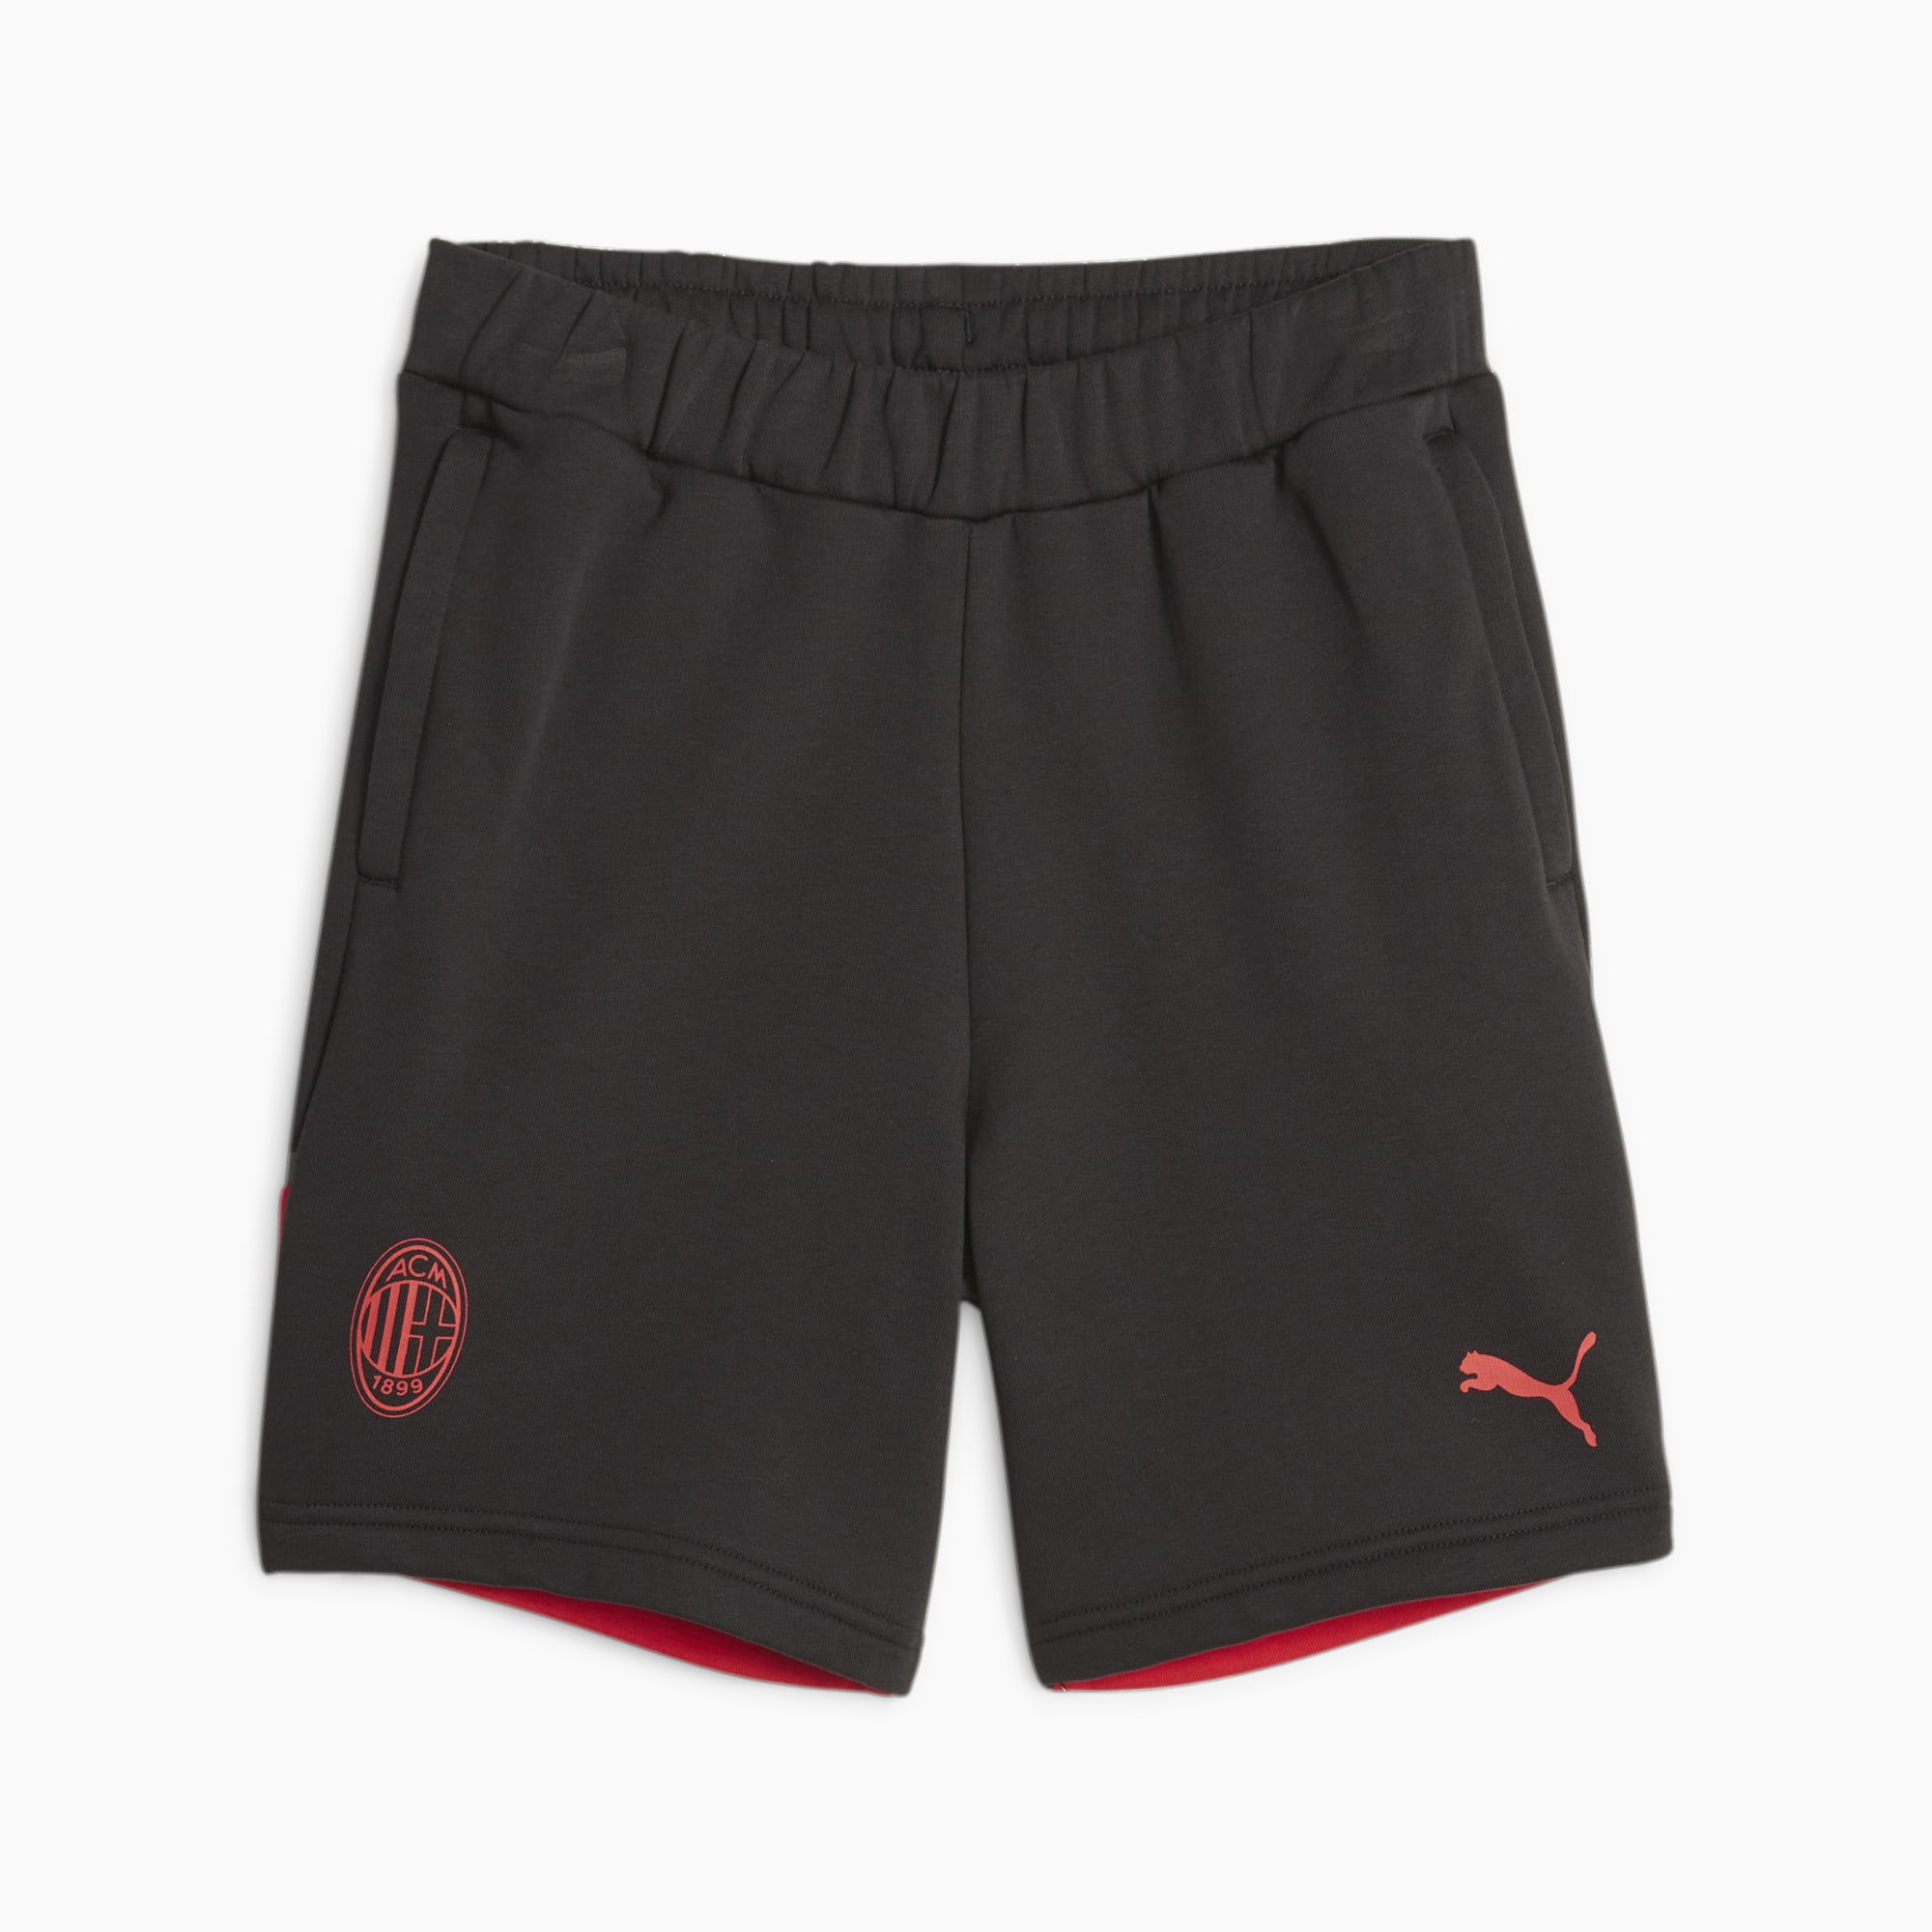 PUMA AC Milan Football Casuals Youth Shorts, Black/For All Time Red